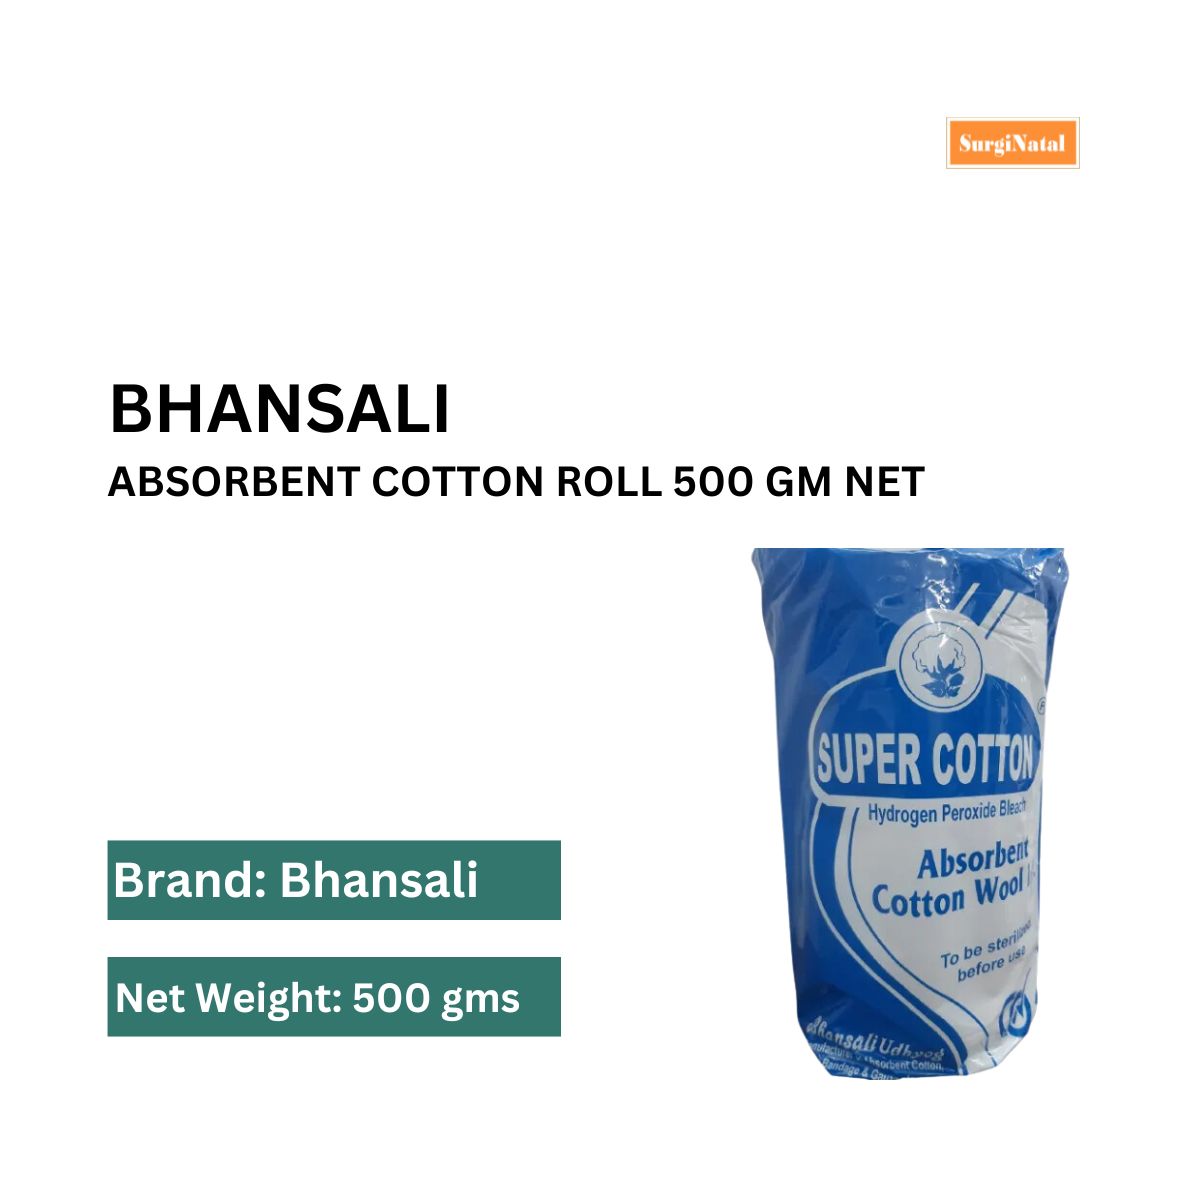  absorbent cotton roll